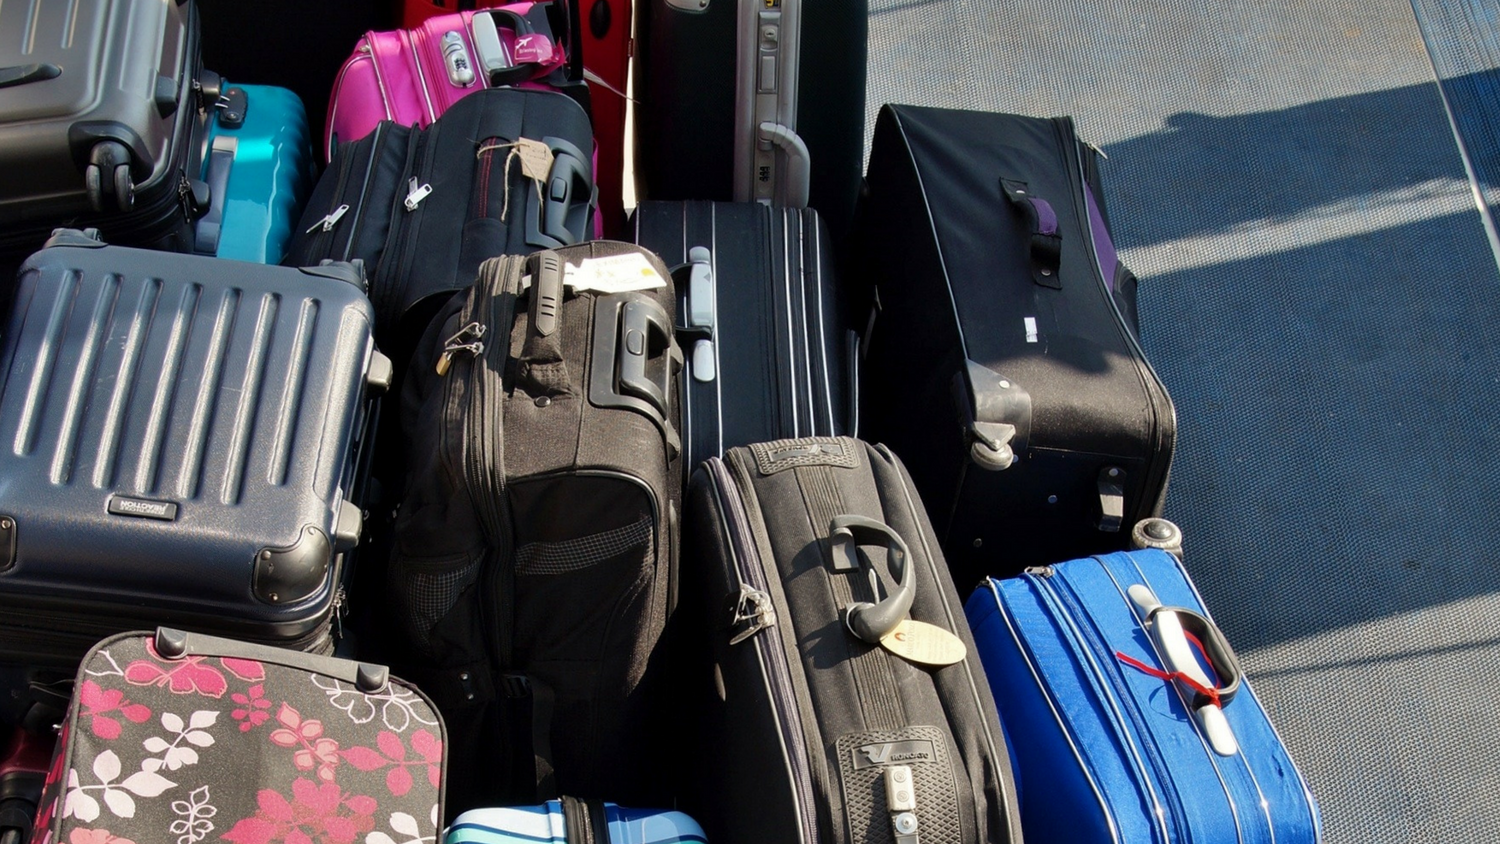 Pile of suitcases on ground